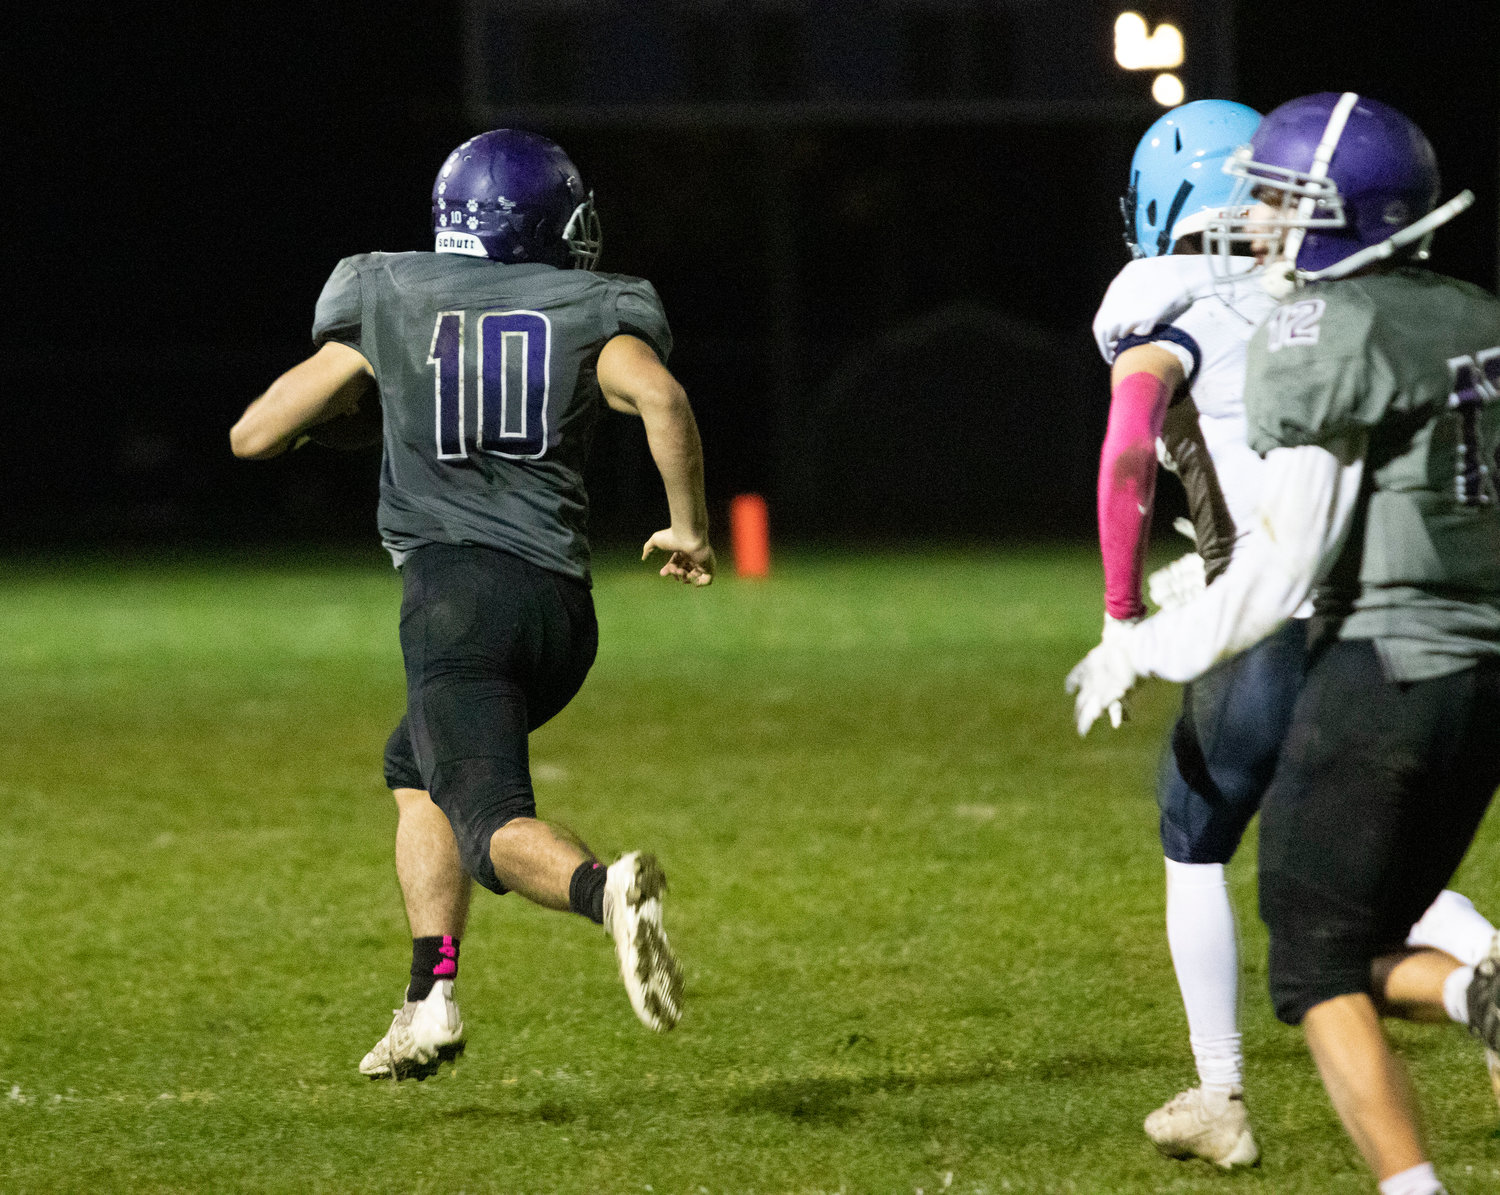 Senior running back Ben Colouro catches a screen pass from quarterback Riley Howland and runs 78-yards for a touchdown to give the Mt. Hope a chance to tie the game.